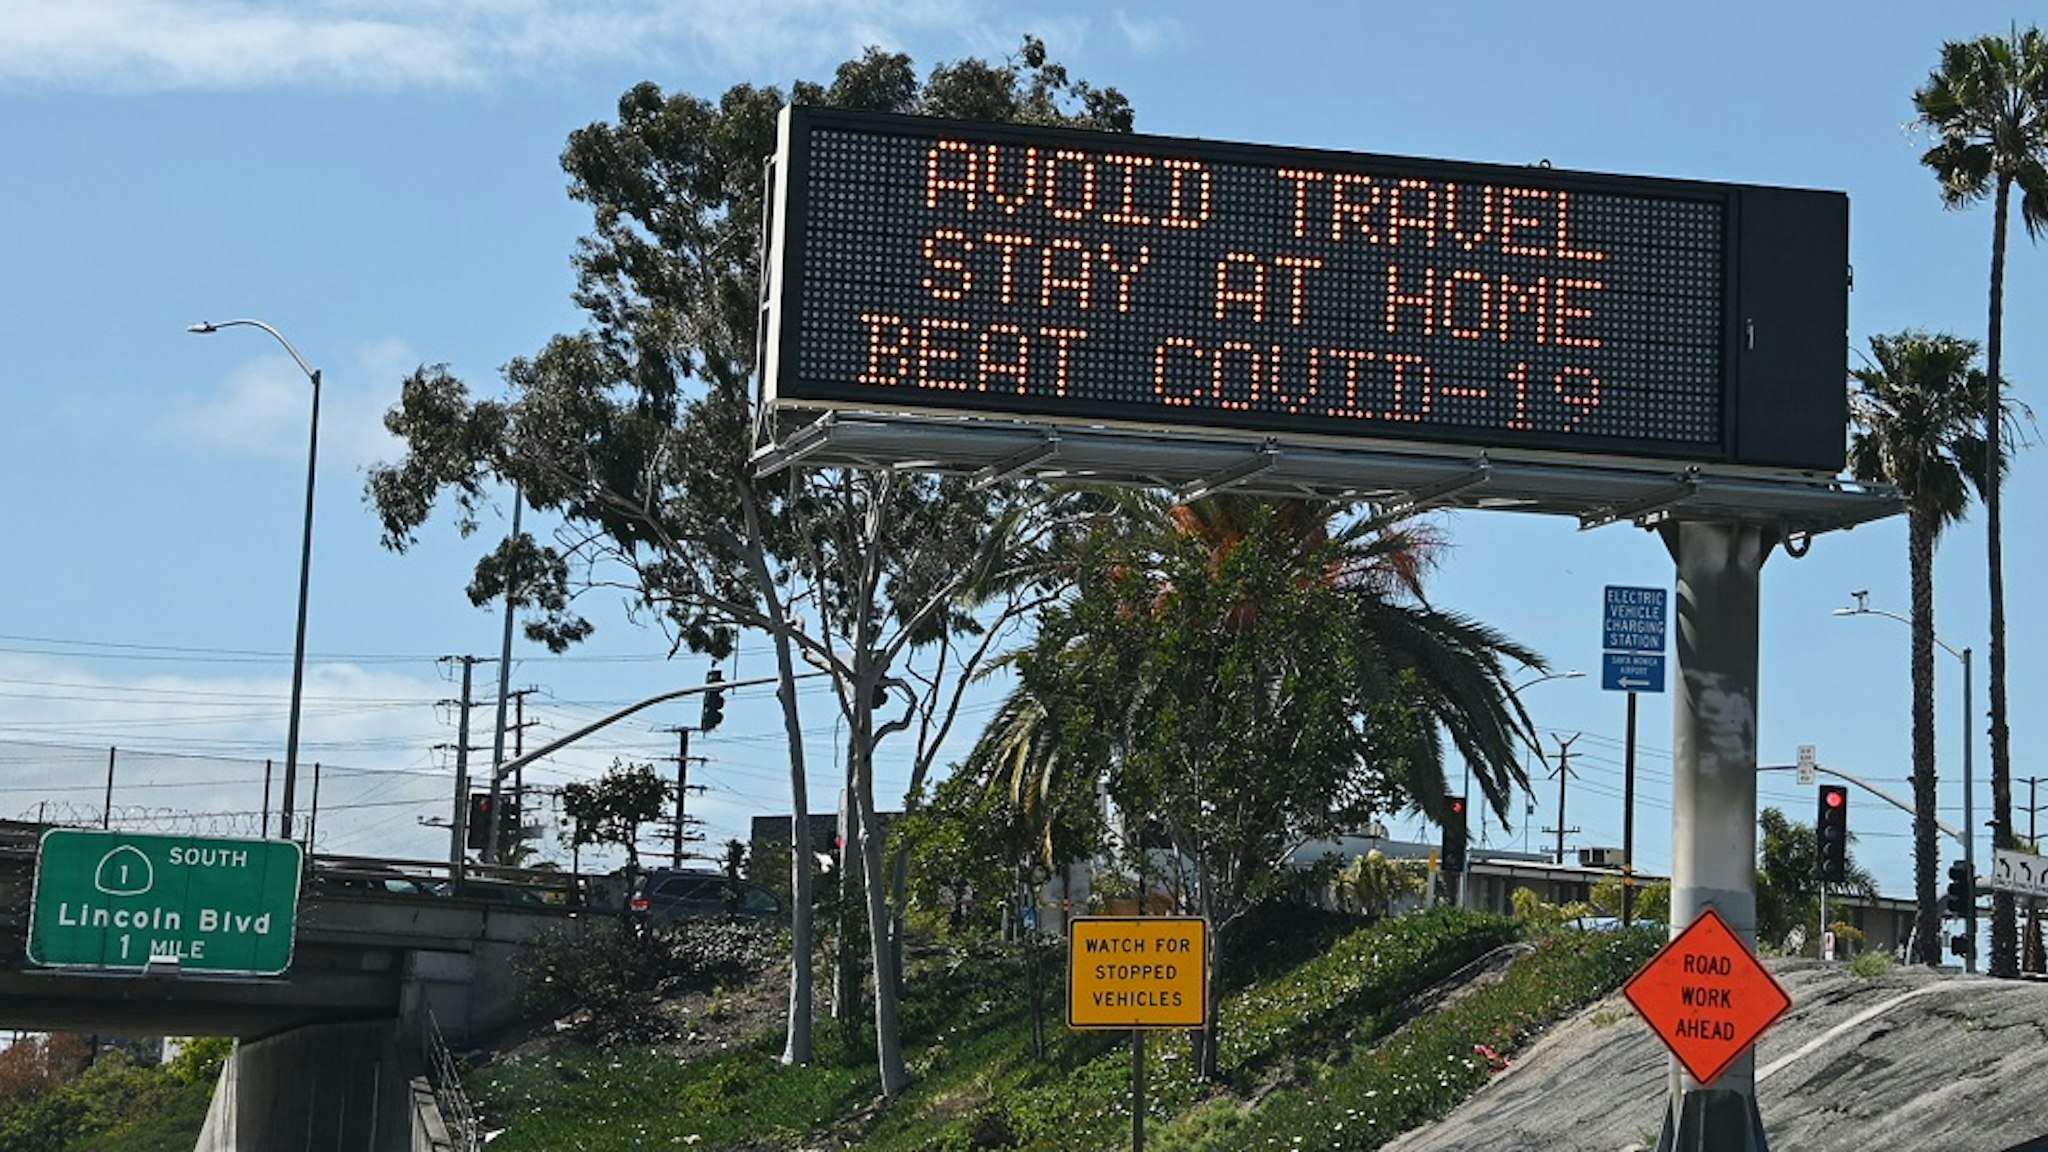 Highway digital signs display messages about stay home and avoiding travel during an outbreak of the COVID-19 coronavirus, Los Angeles, California, March 25, 2020.